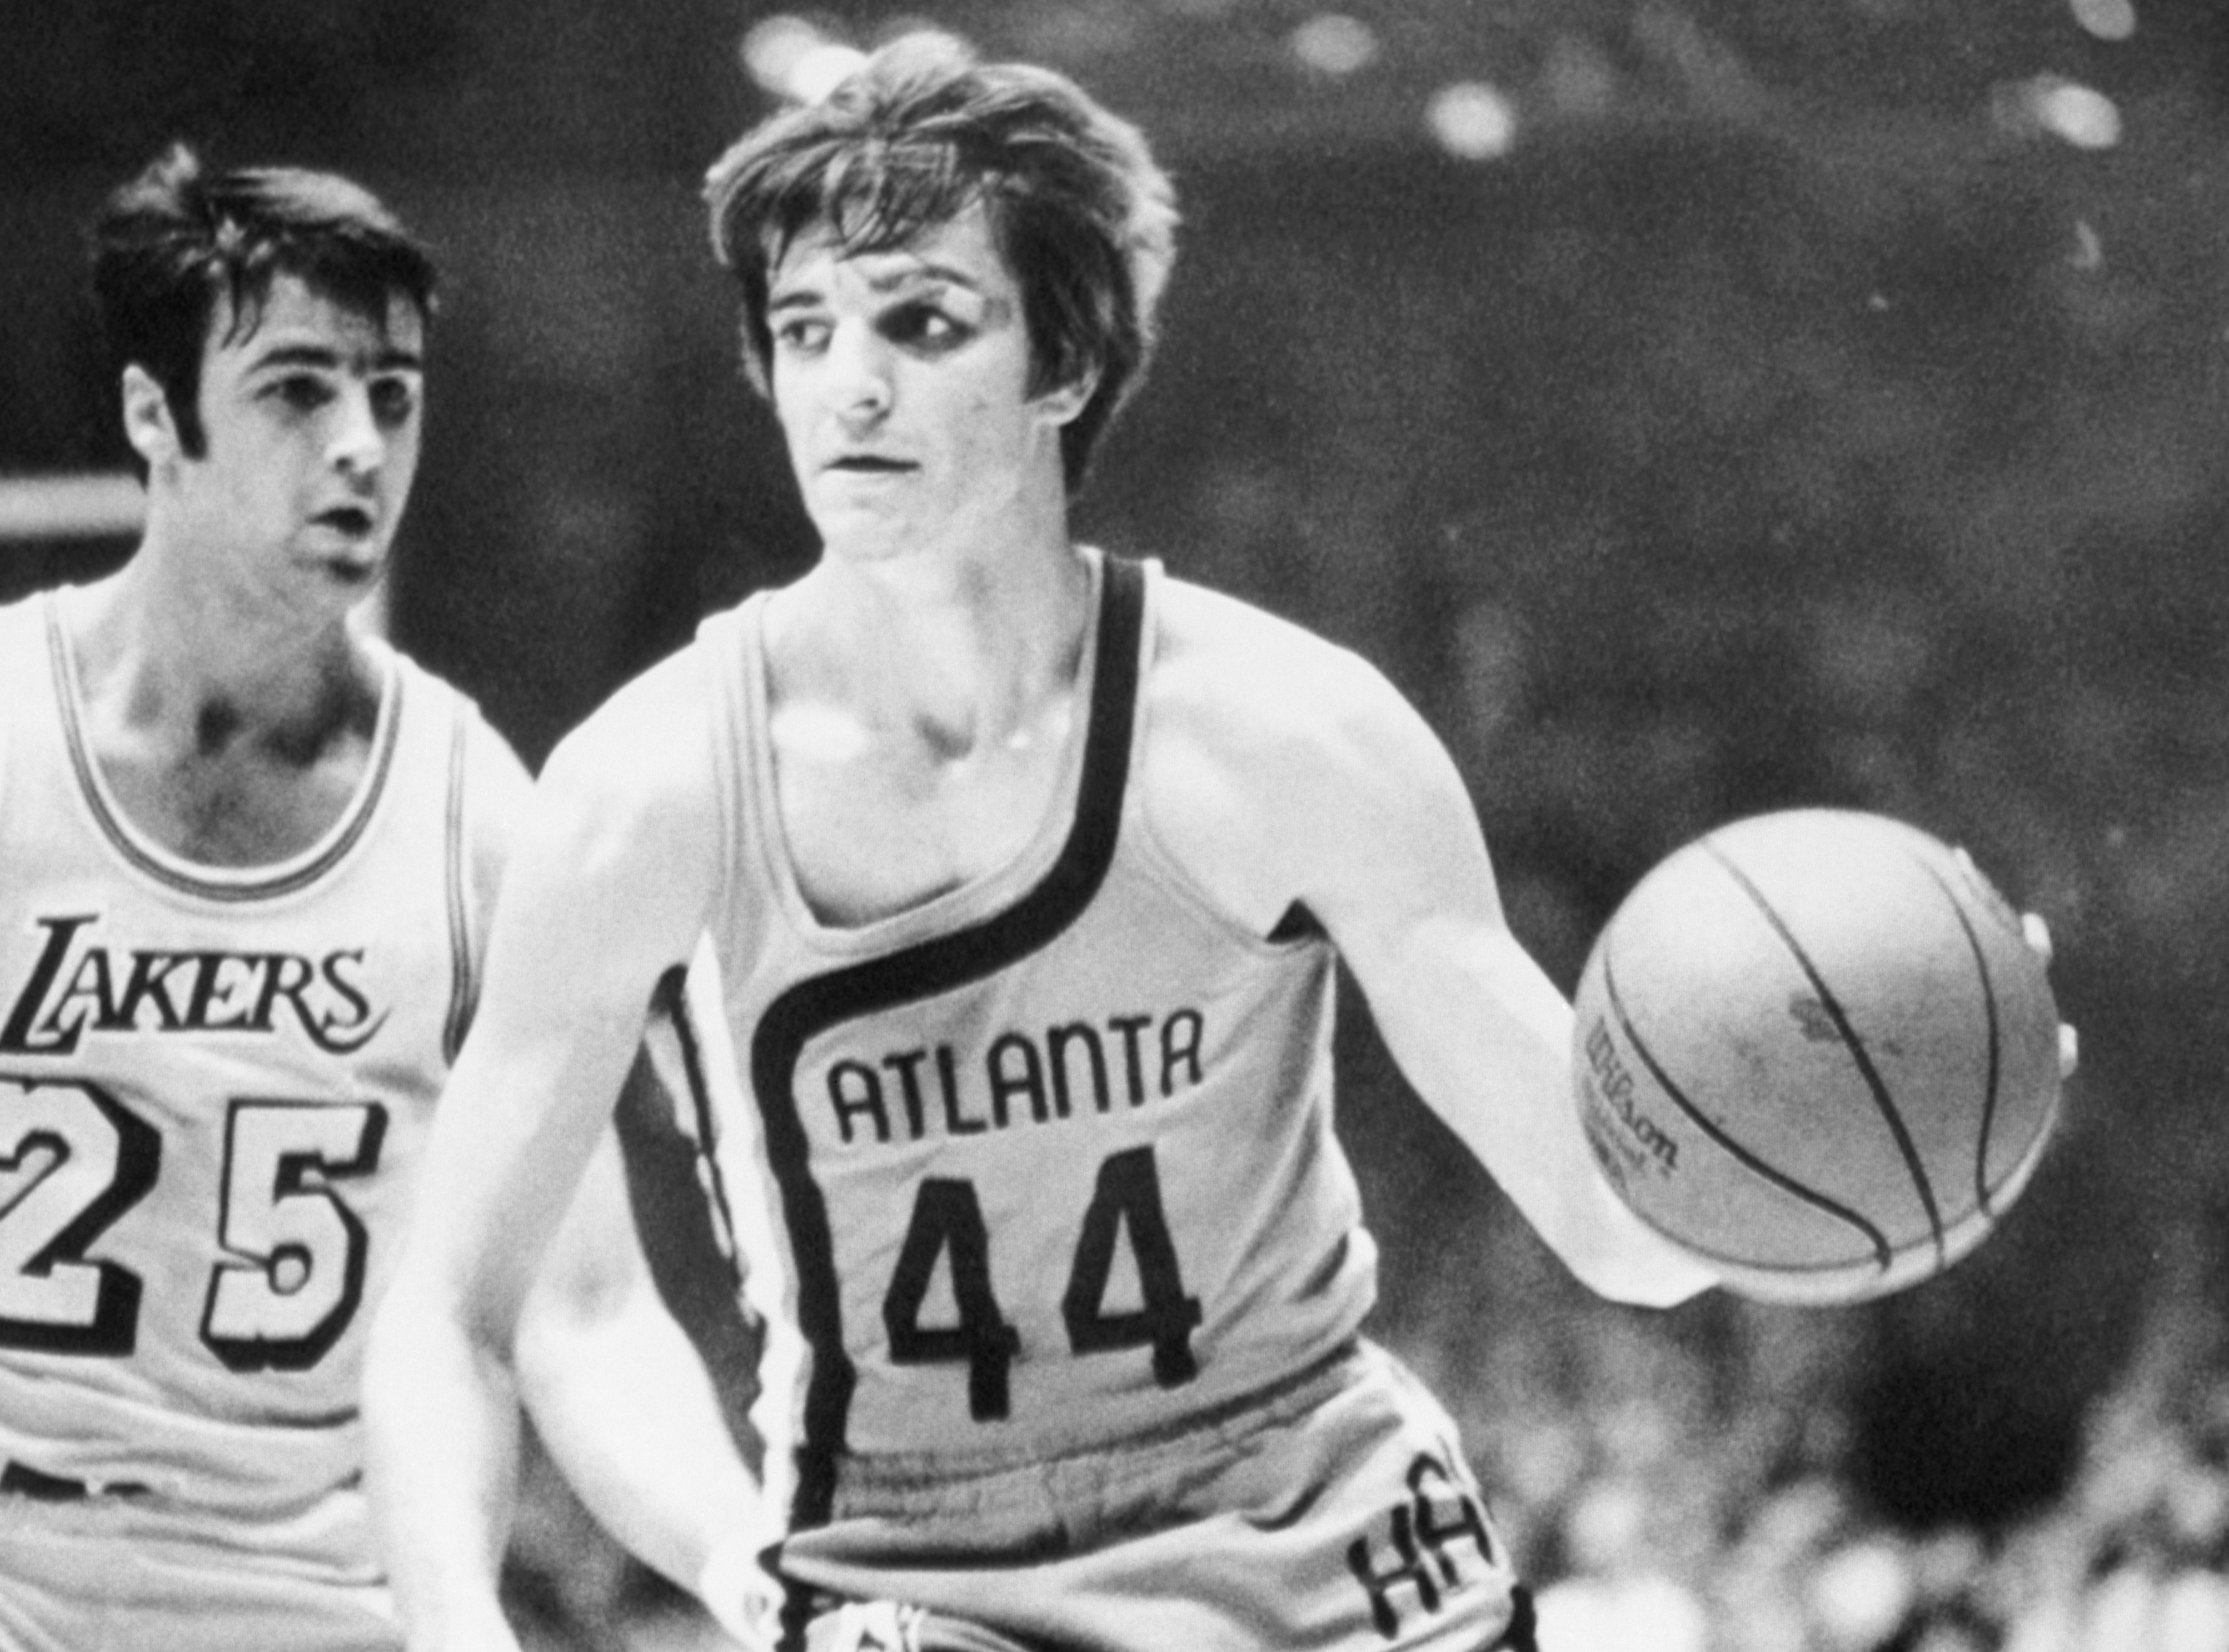 The Naismith Memorial Basketball Hall of Fame :: Pete Maravich